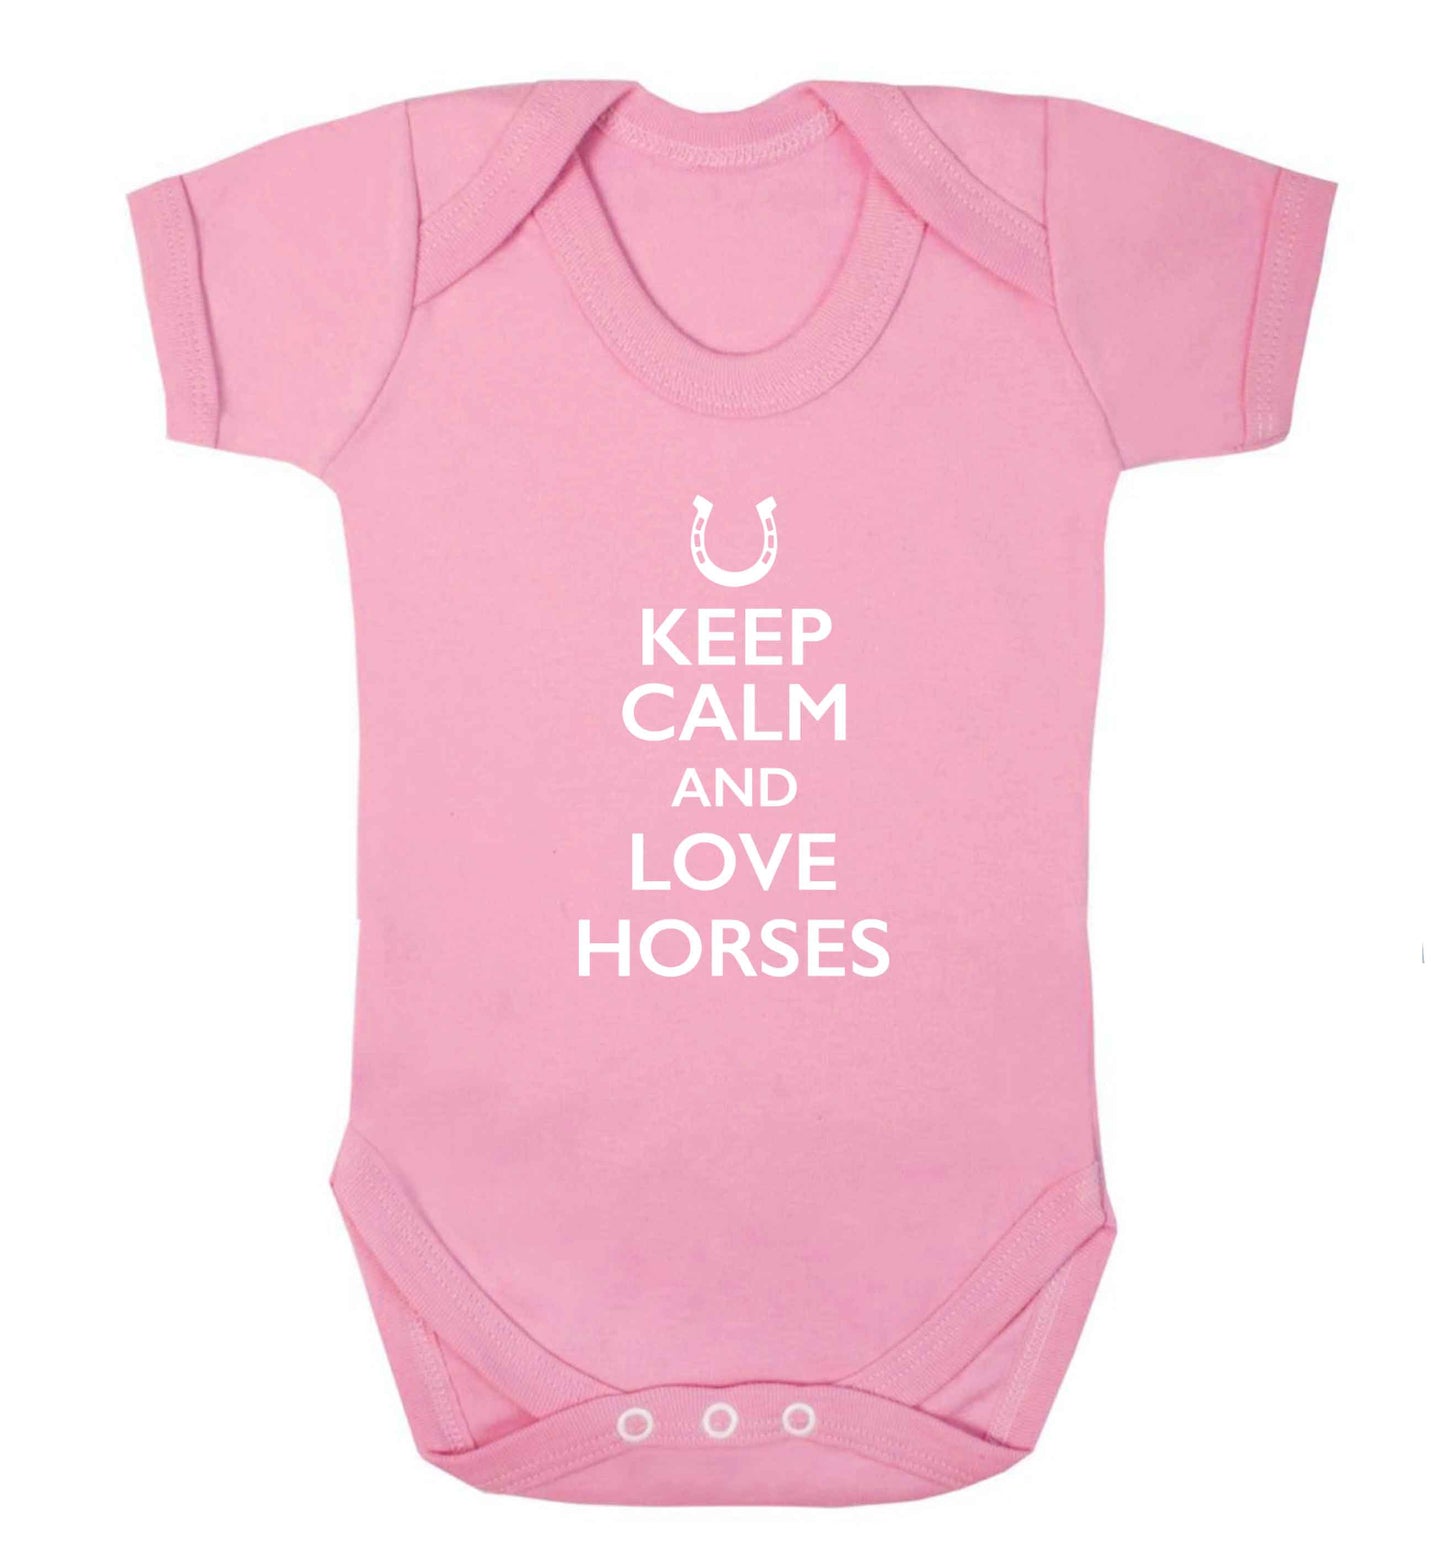 Keep calm and love horses baby vest pale pink 18-24 months